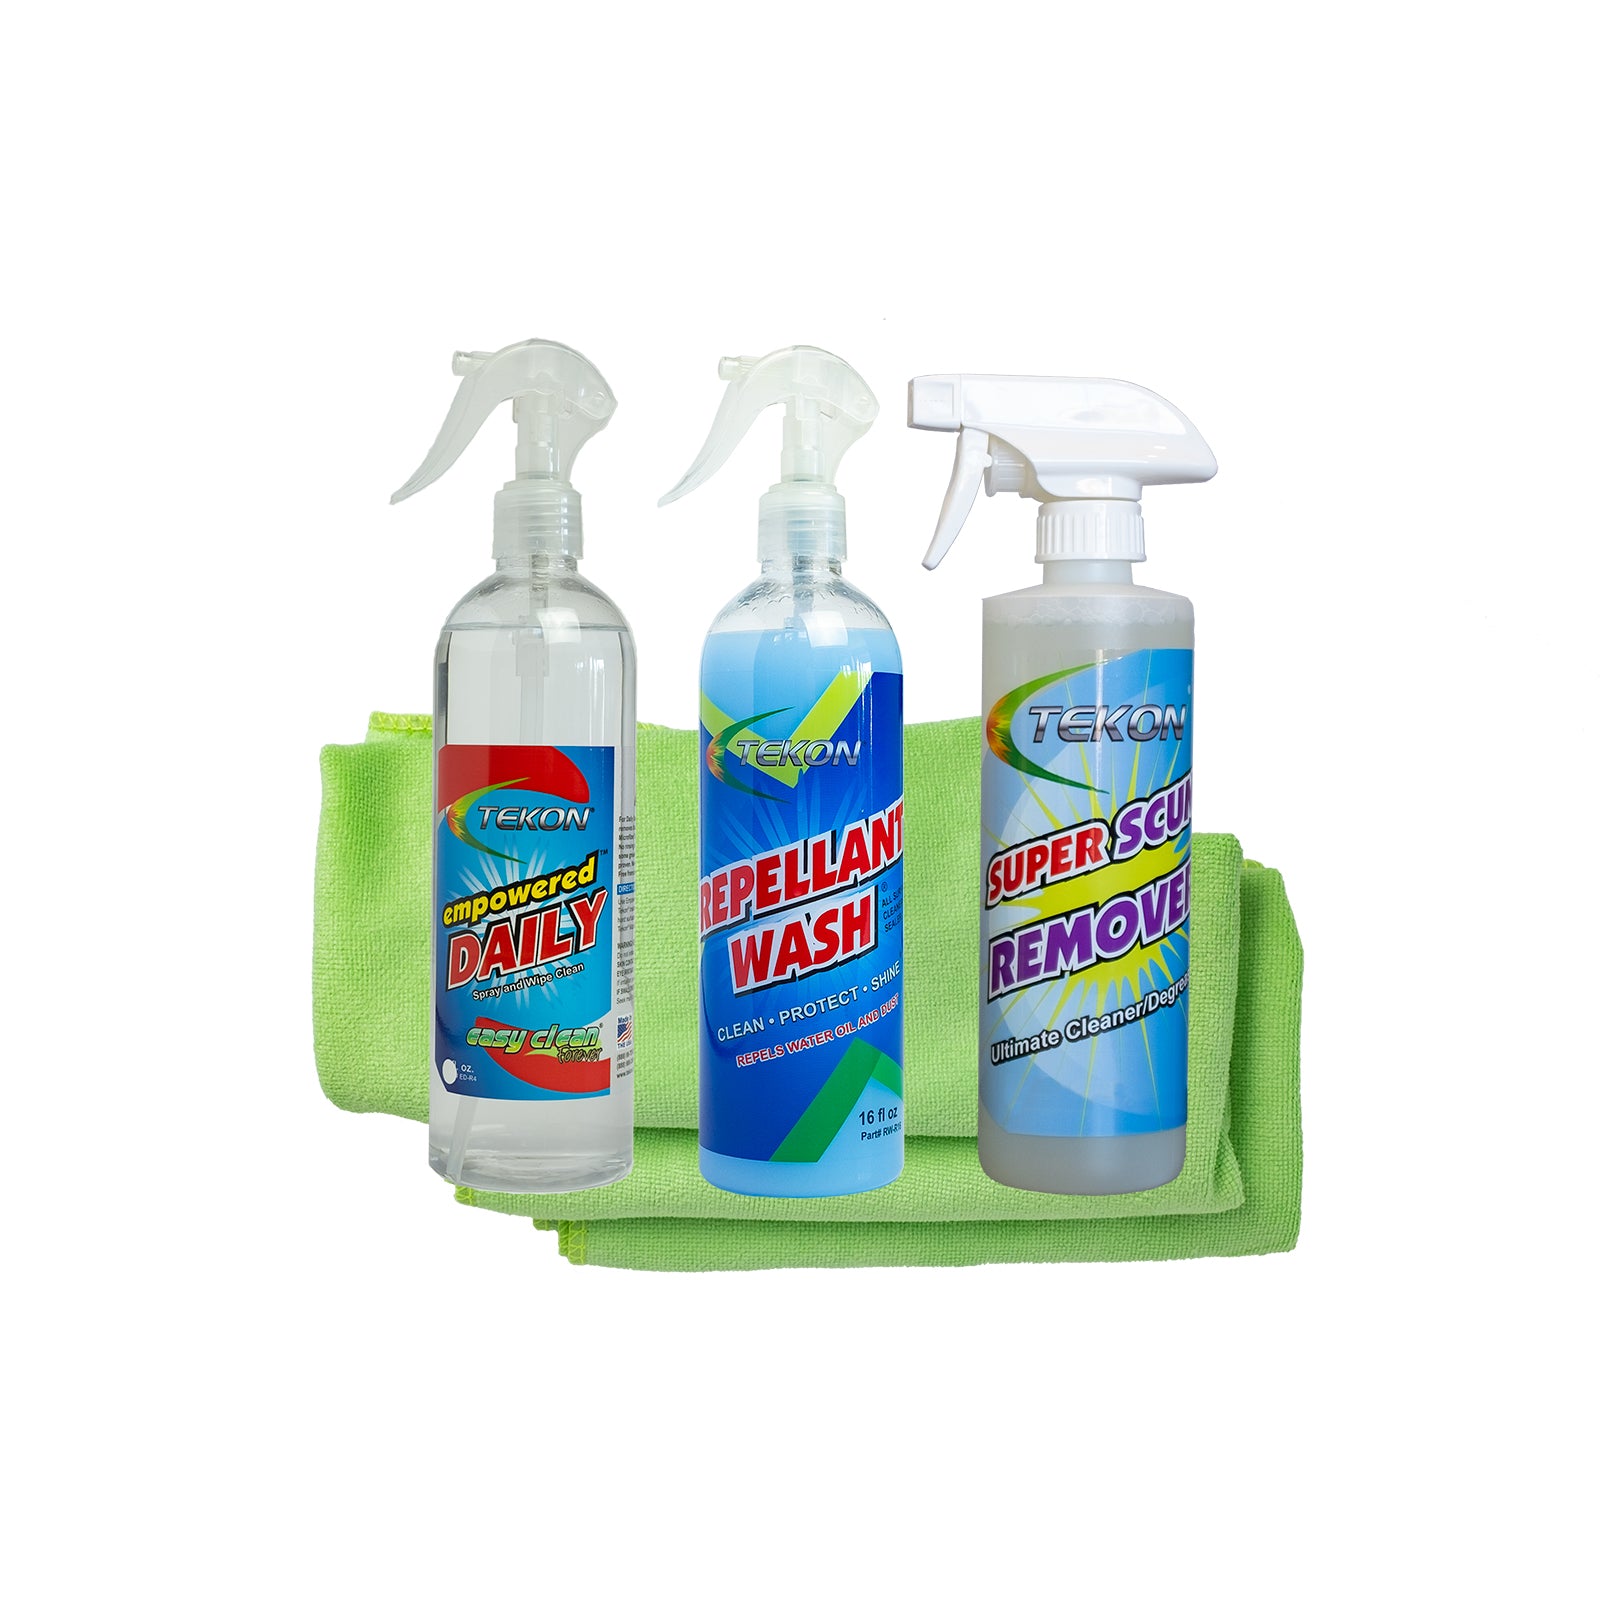 TXON Stores Your choice for home products.. Cleaning Accessories